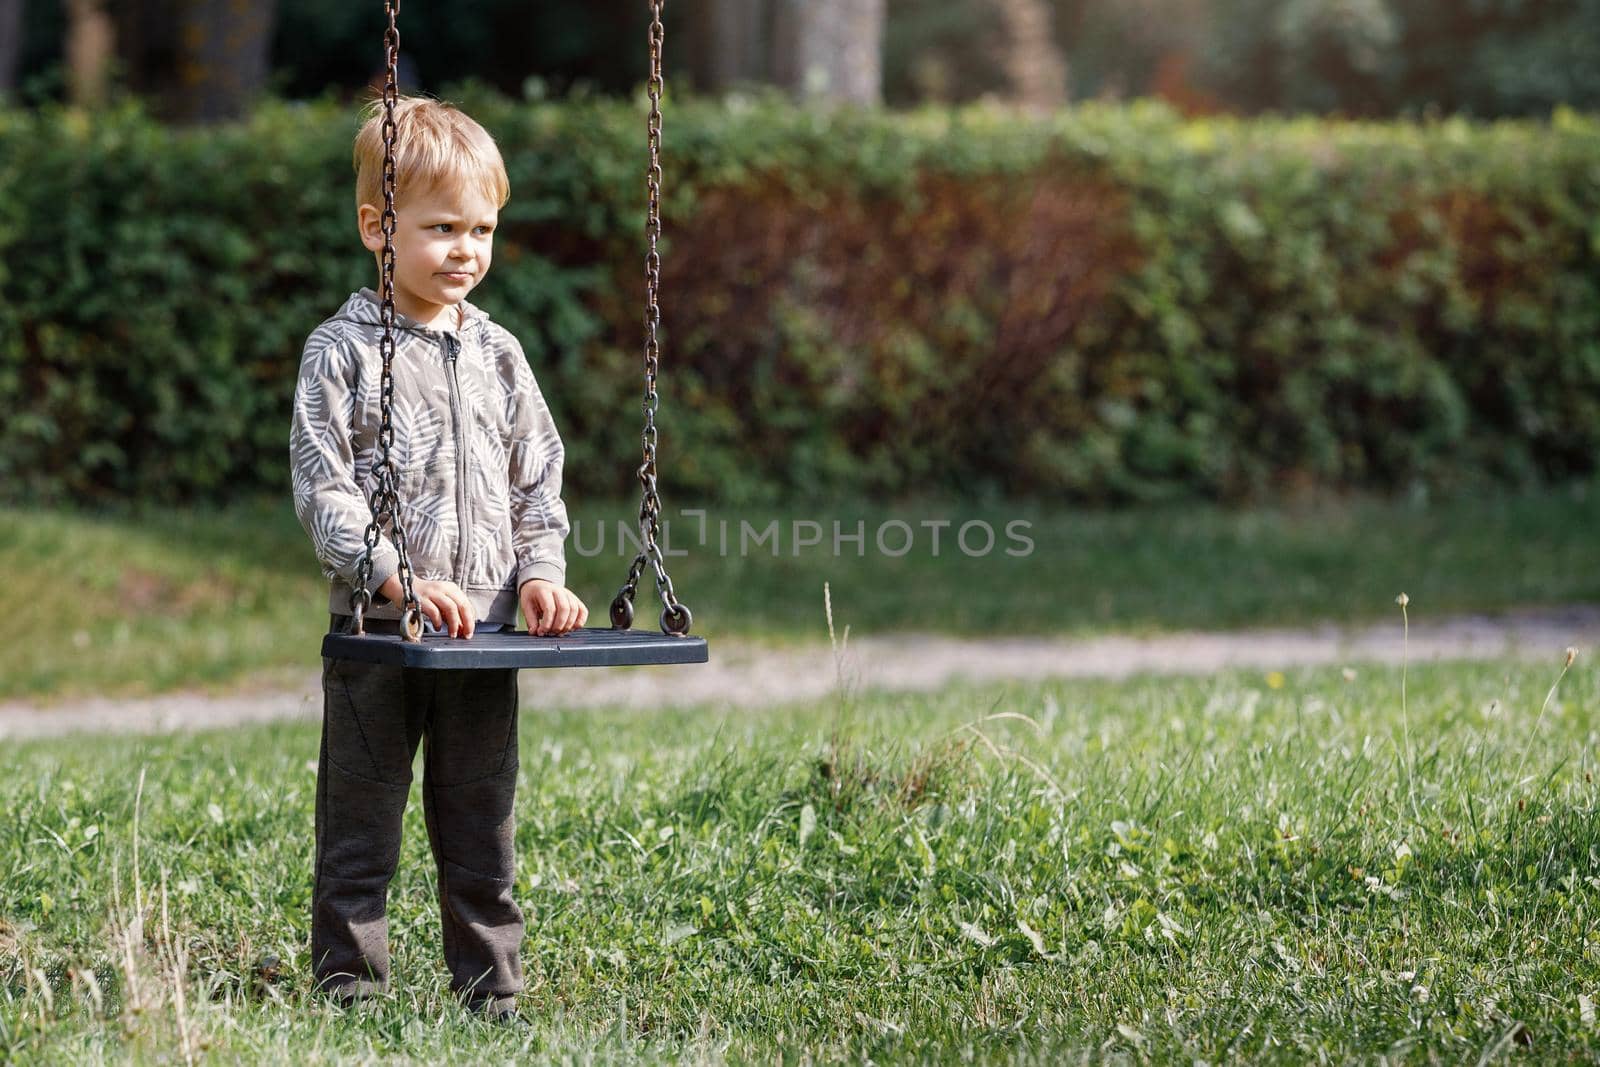 An attractive little boy stands next to a swing with chains in a city park, a child getting ready to swing. Horizontal photo by Lincikas